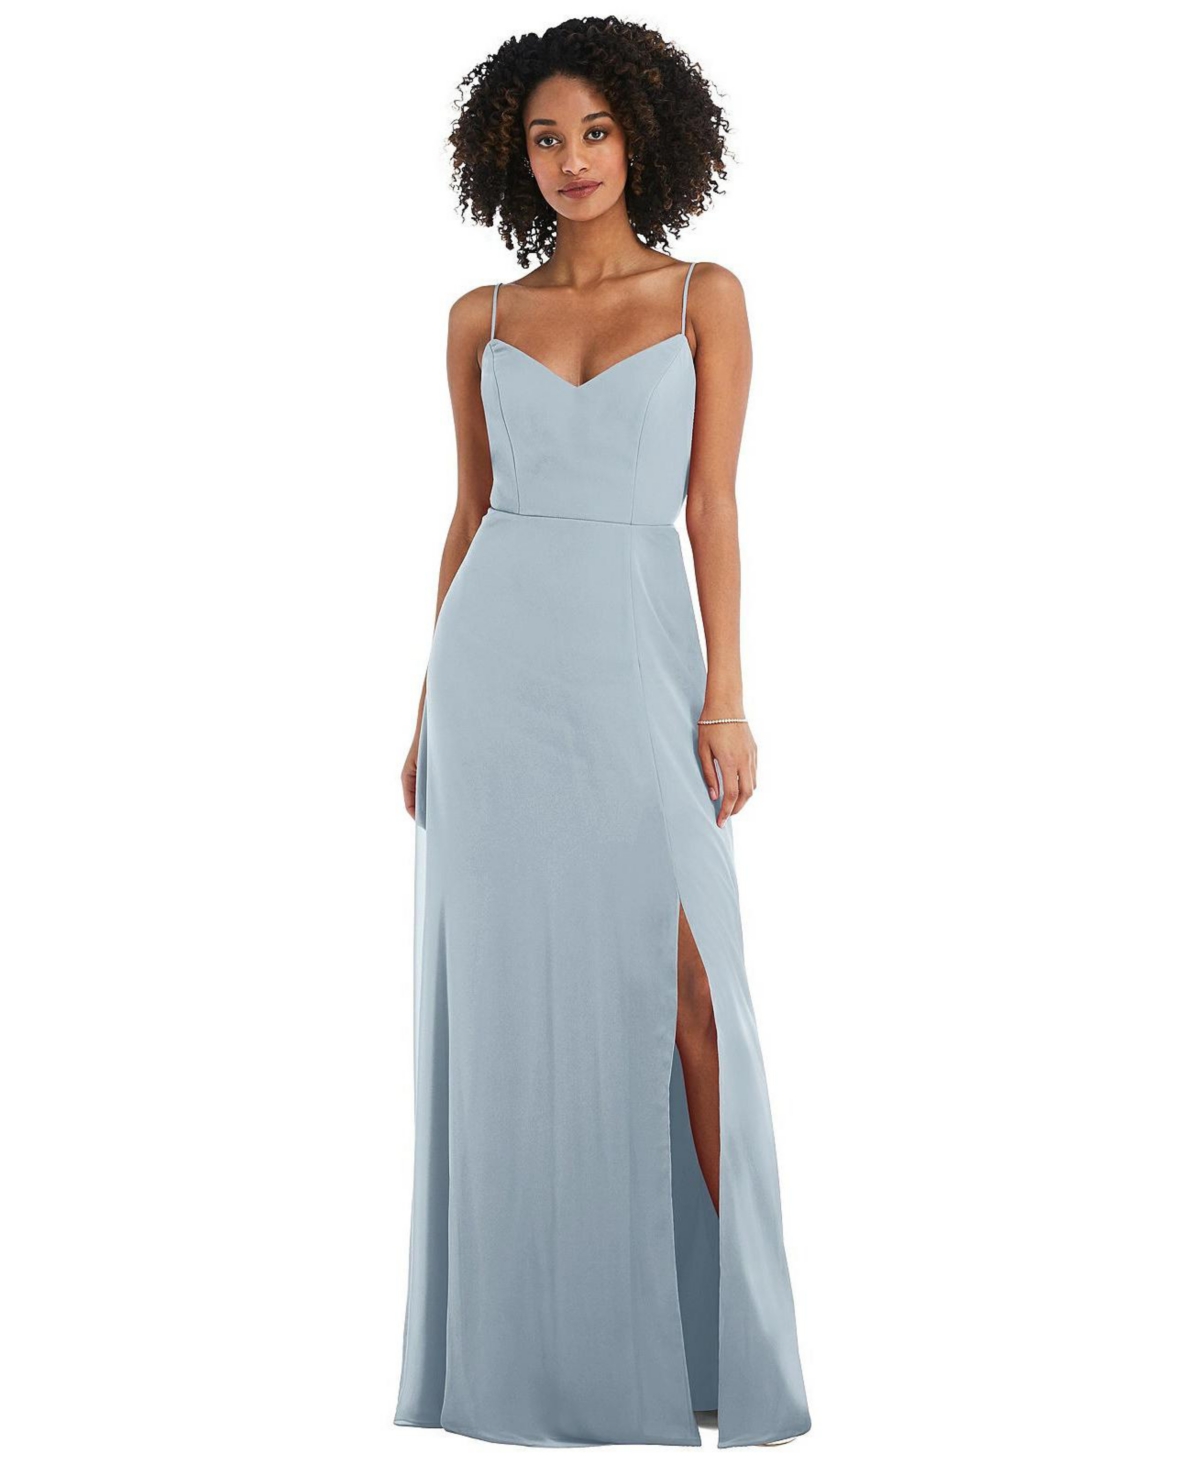 Women's Tie-Back Cutout Maxi Dress with Front Slit - Willow green